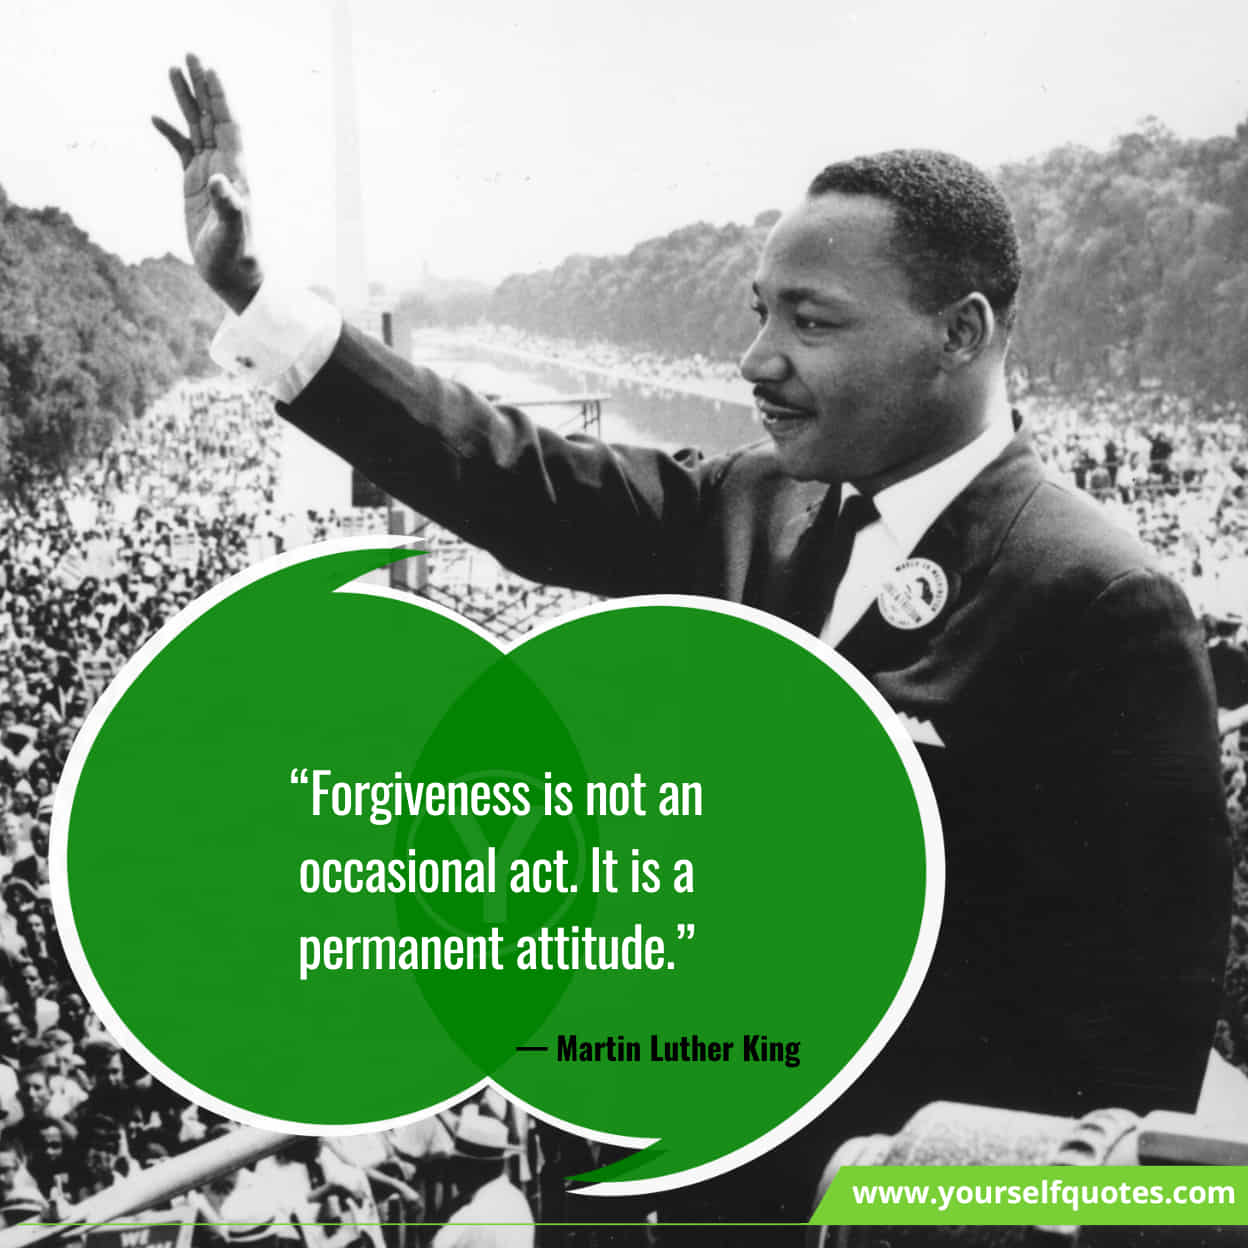 Best Martin Luther King, Jr. Quotes On Forgiveness